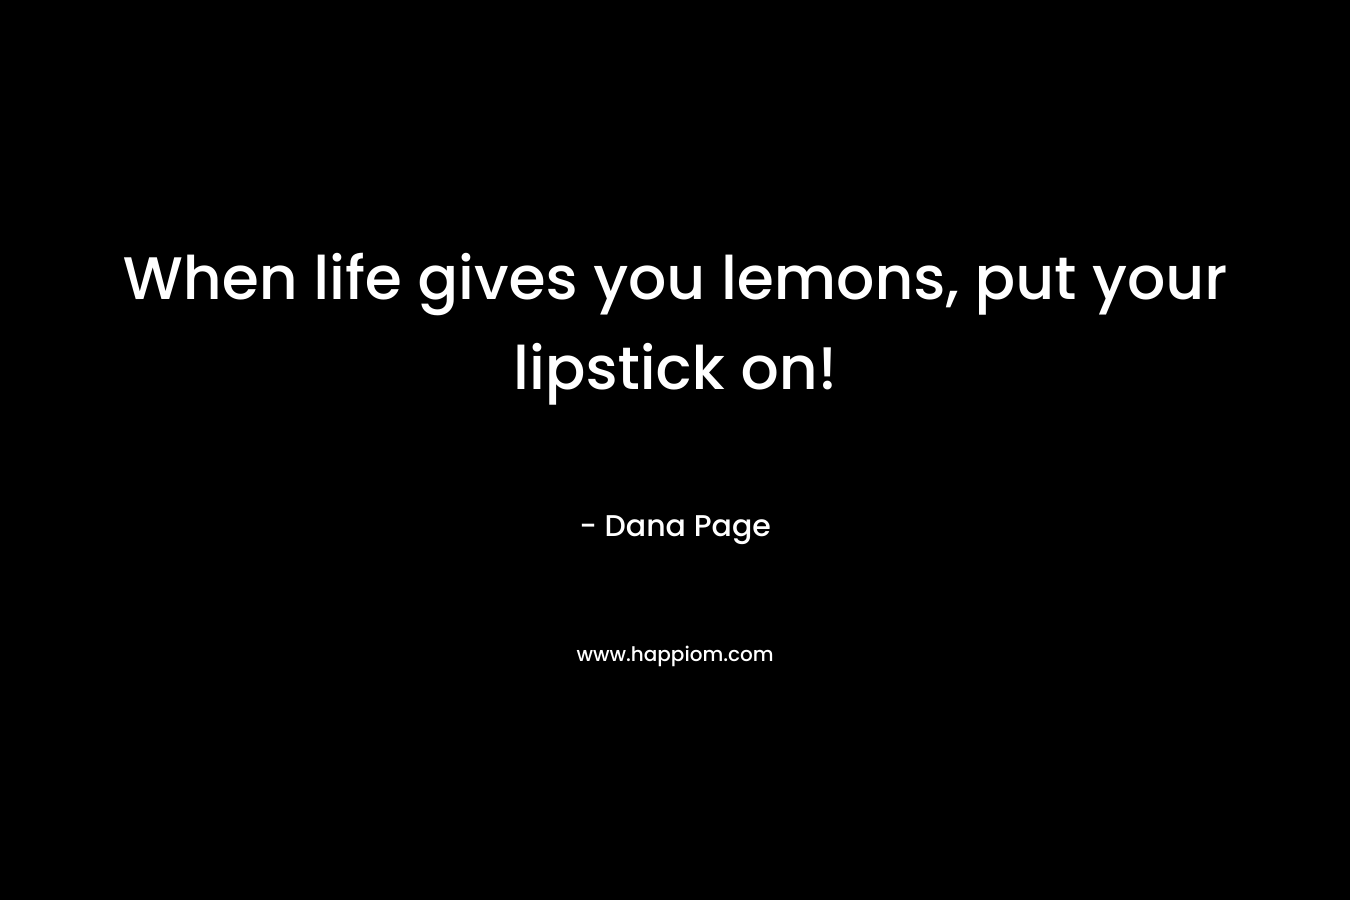 When life gives you lemons, put your lipstick on!